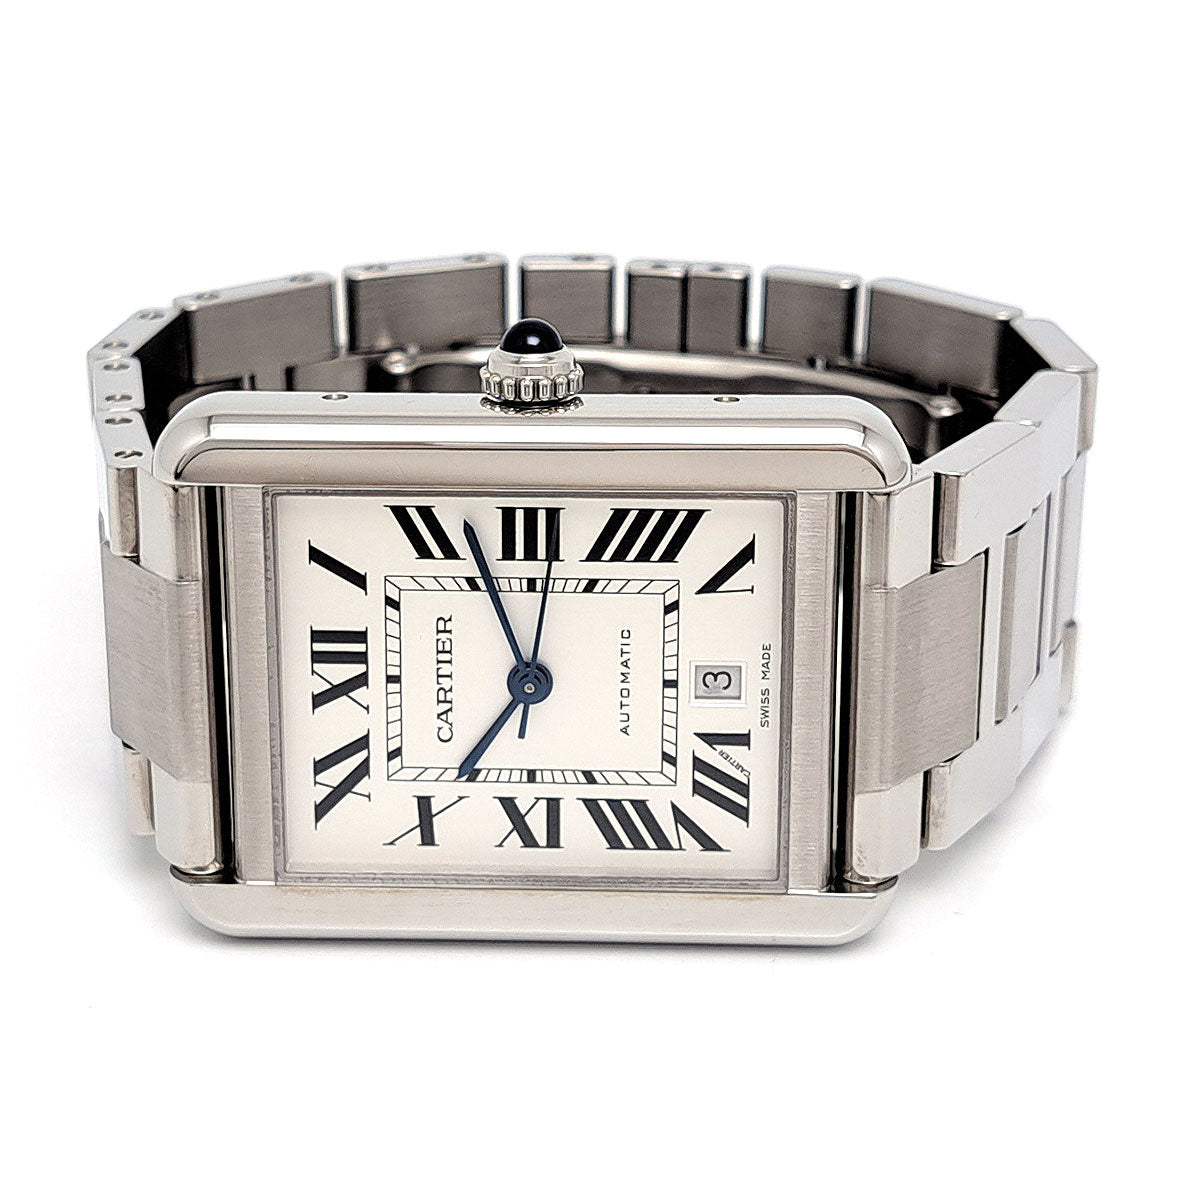 Cartier Tank Solo XL W5200028 Automatic Stainless Steel Men’s Pre-owned Watch W5200028